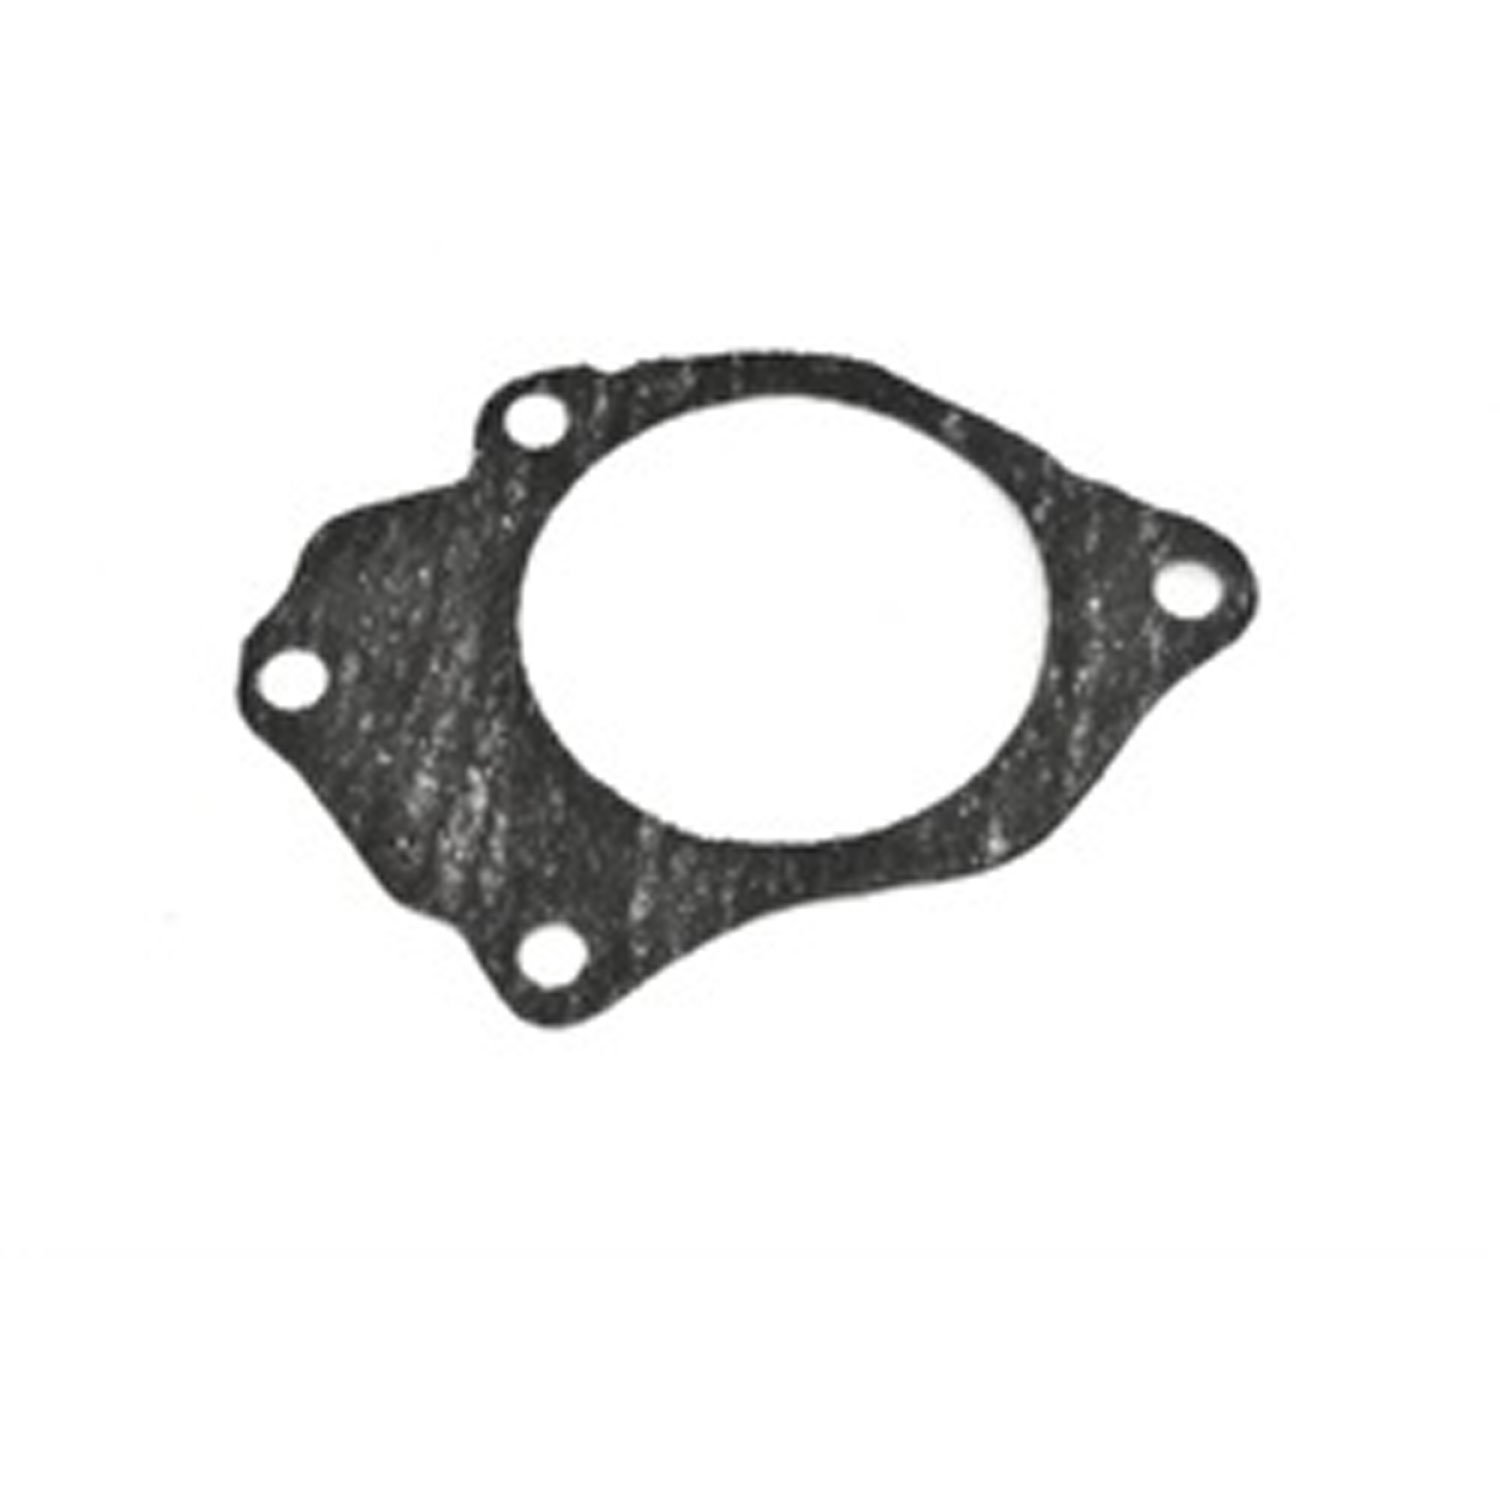 This water pump gasket from Omix-ADA fits the 134 cubic inch 4-cylinder engine found in 41-71 Willys Ford and Jeep models.